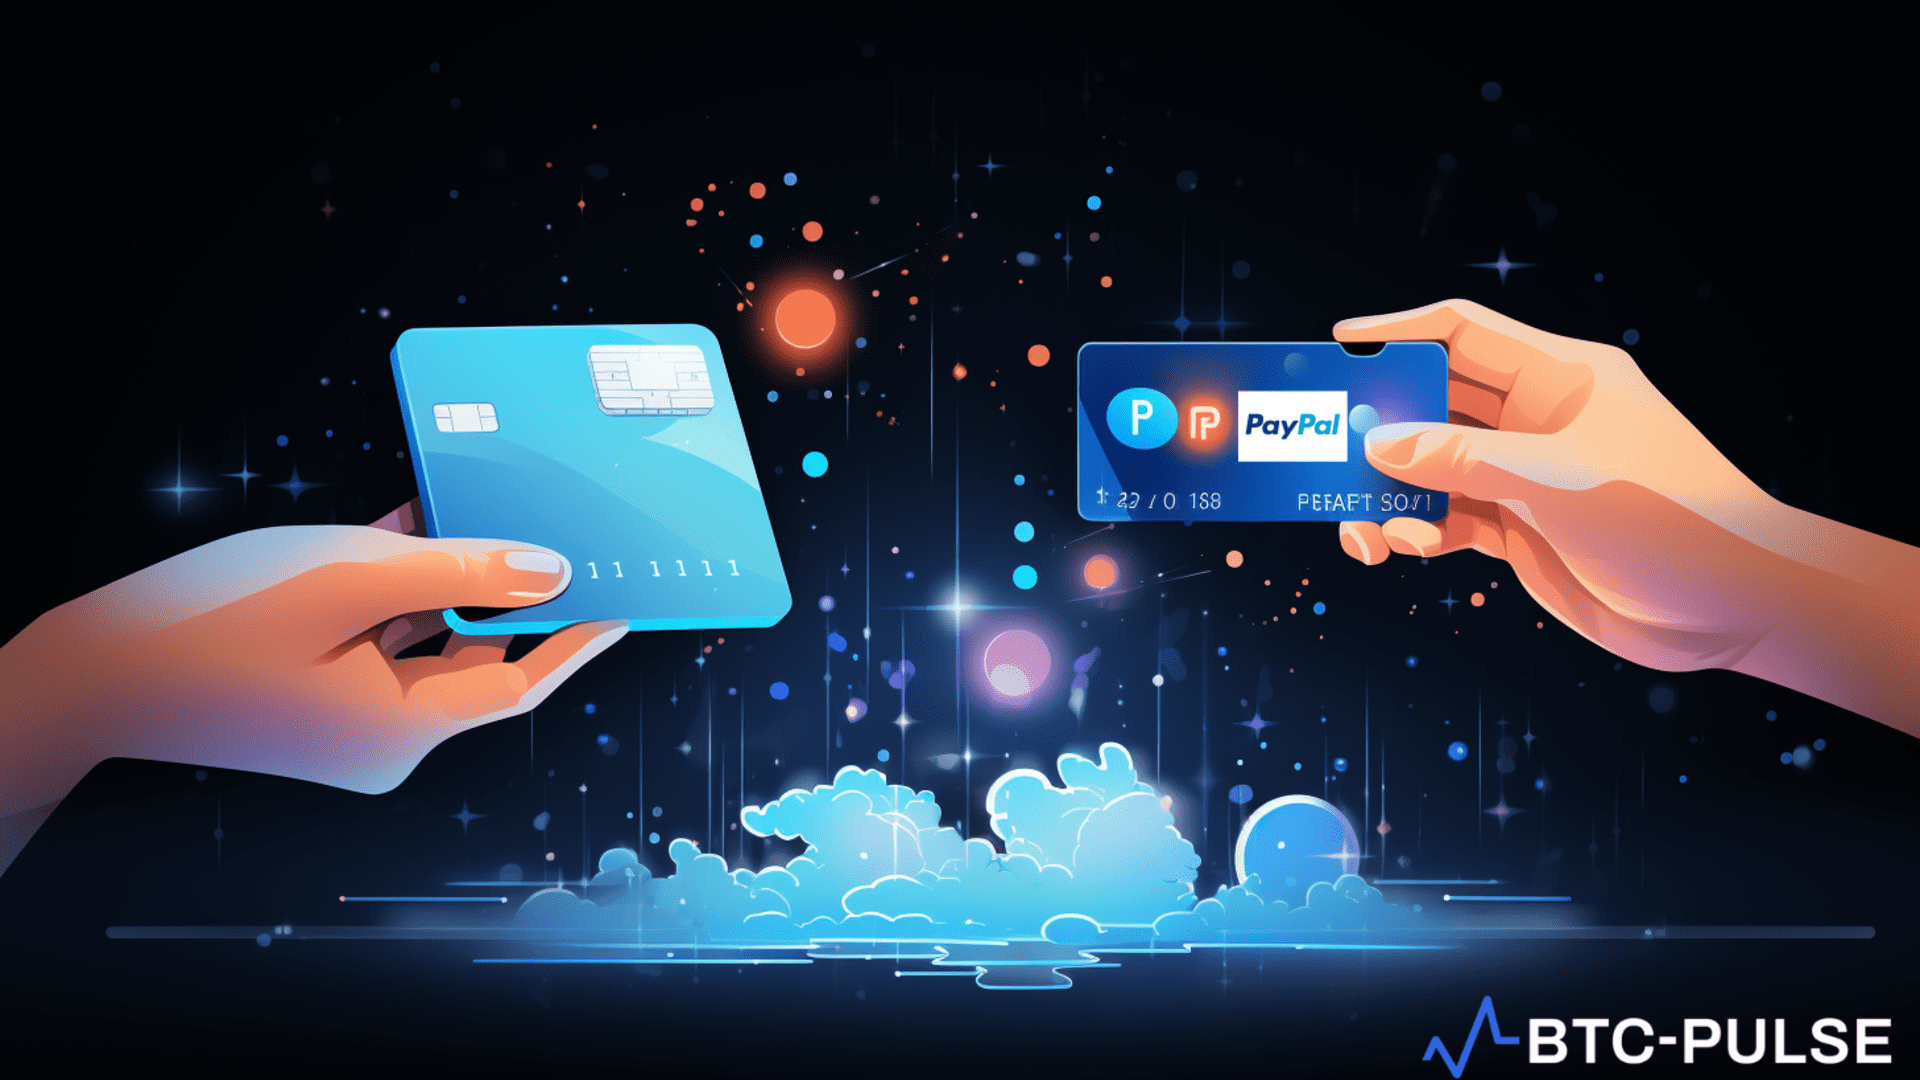 Illustration of MoonPay and PayPal facilitating cryptocurrency transactions